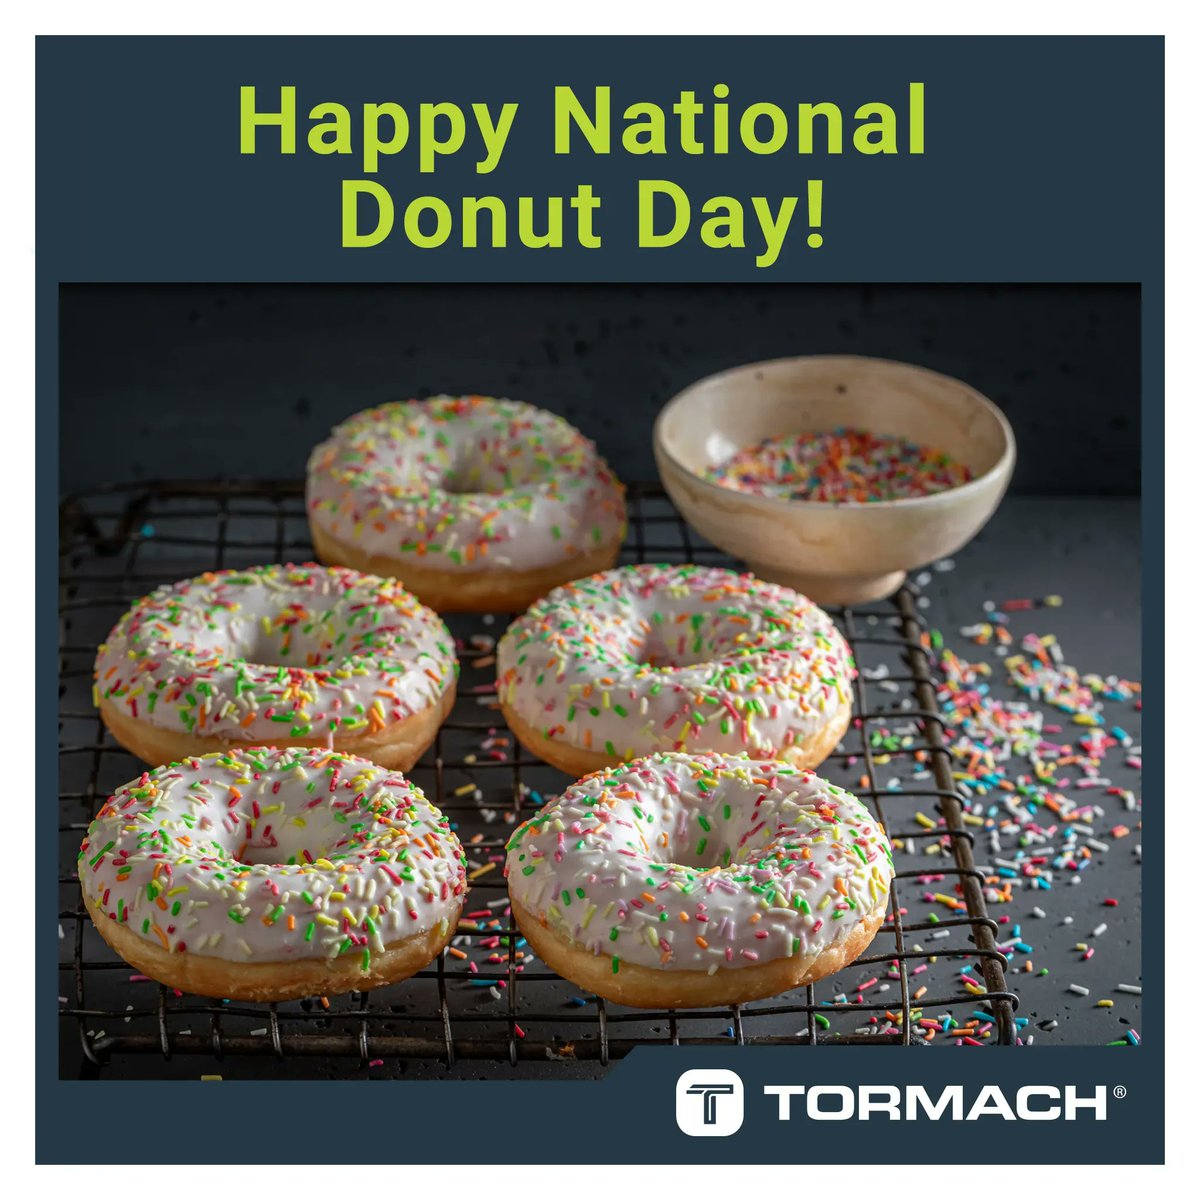 🍩 Happy National Donut Day! 🍩

We know most of you think of this shape as a torus, not a donut. Technically, you're right. We just want to remind you to enjoy the sweet things in life.  😋 #Tormach #NationalDonutDay #DonutLovers